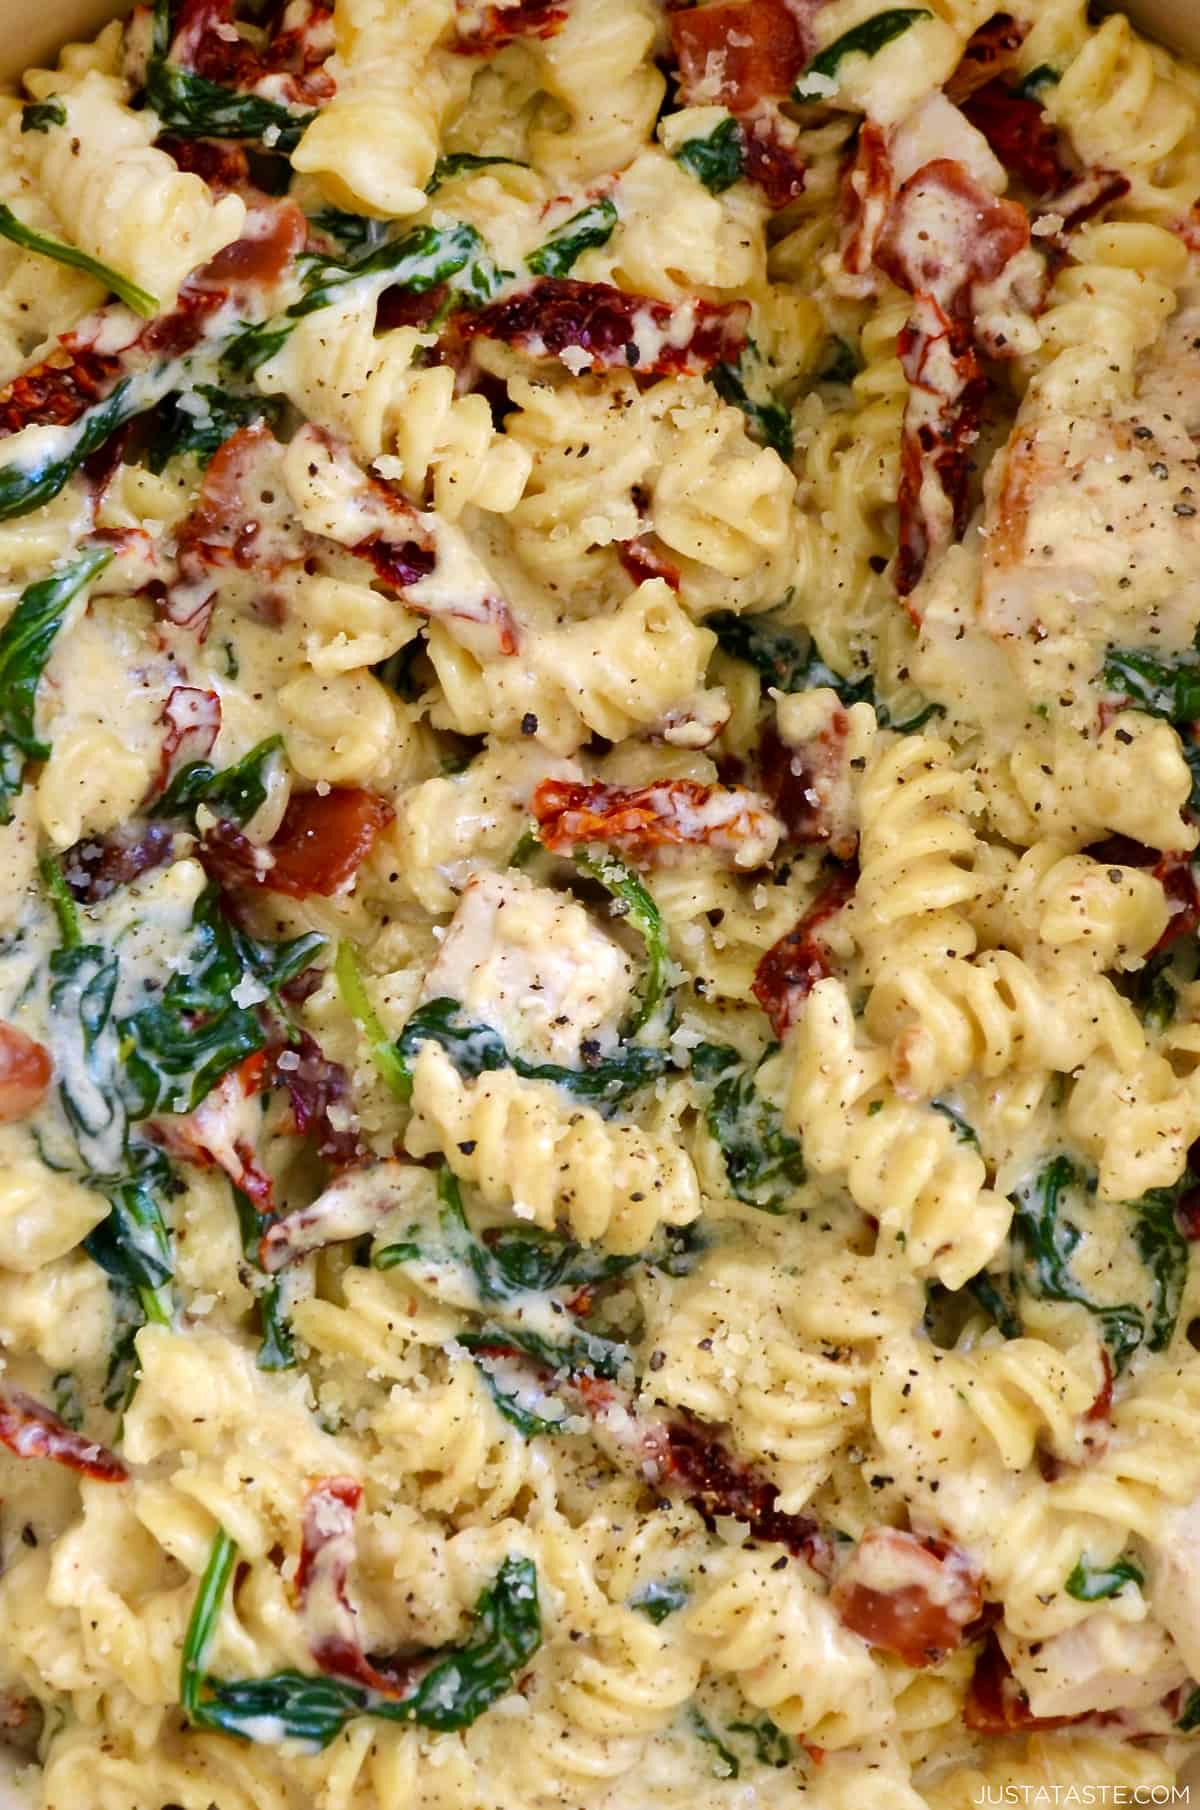 Rotini pasta coated in a creamy Parmesan sauce with diced chicken breasts, sun-dried tomatoes and wilted spinach.